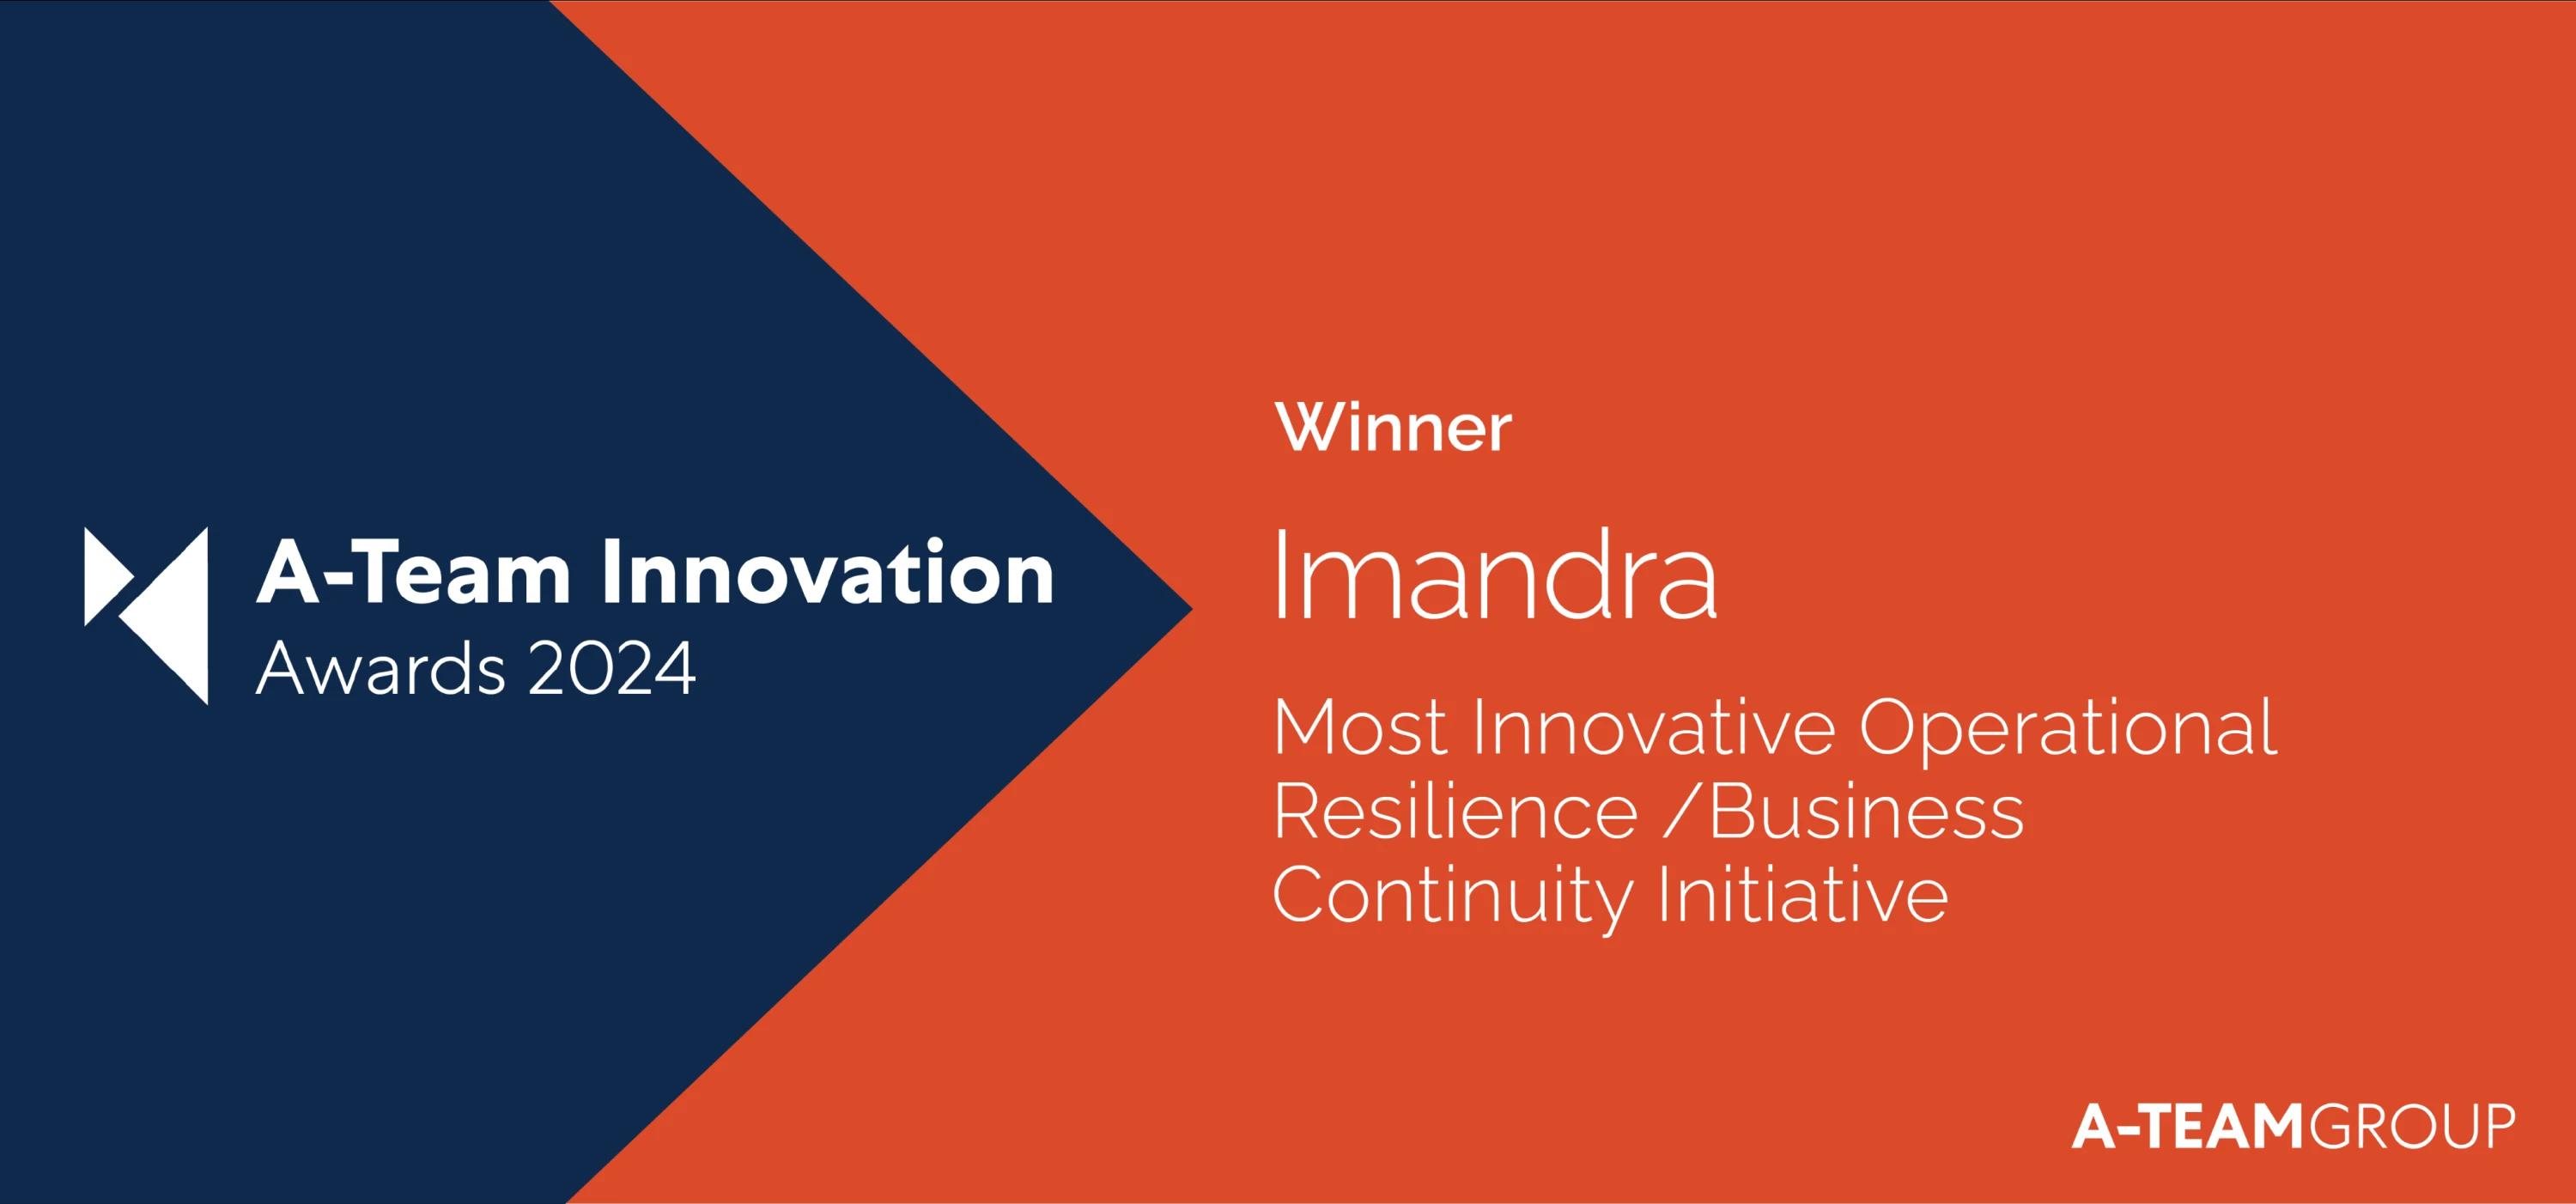 Imandra wins Most Innovative Operational Resilience/Business Continuity Initiative at the A-Team Innovation Awards